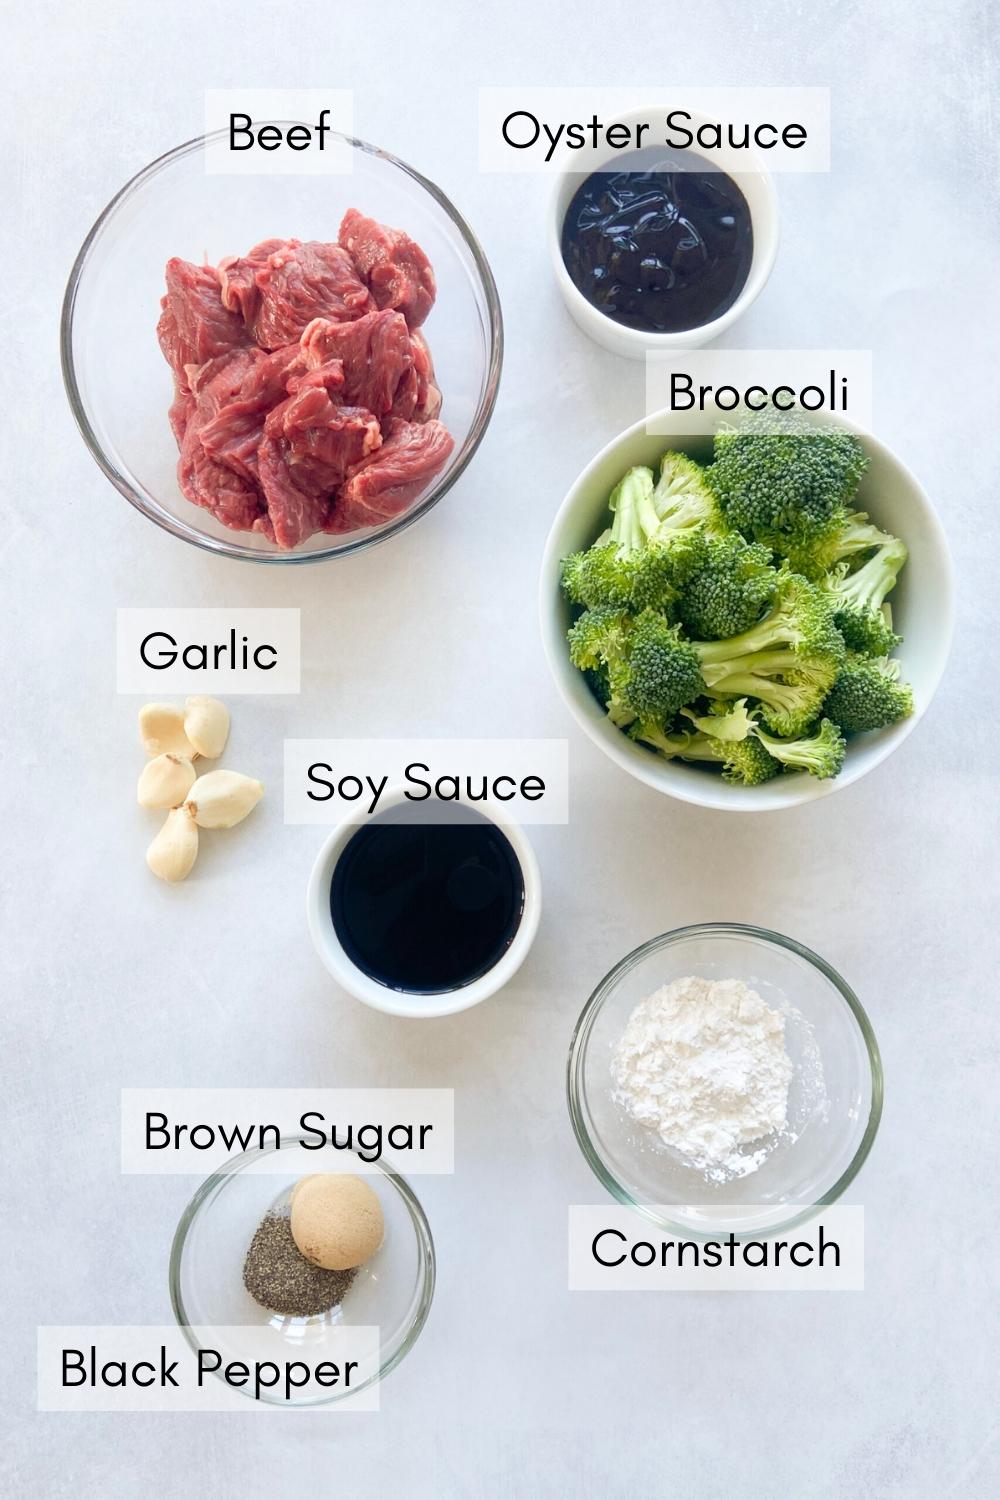 Beef and broccoli stir fry sauce ingredients.